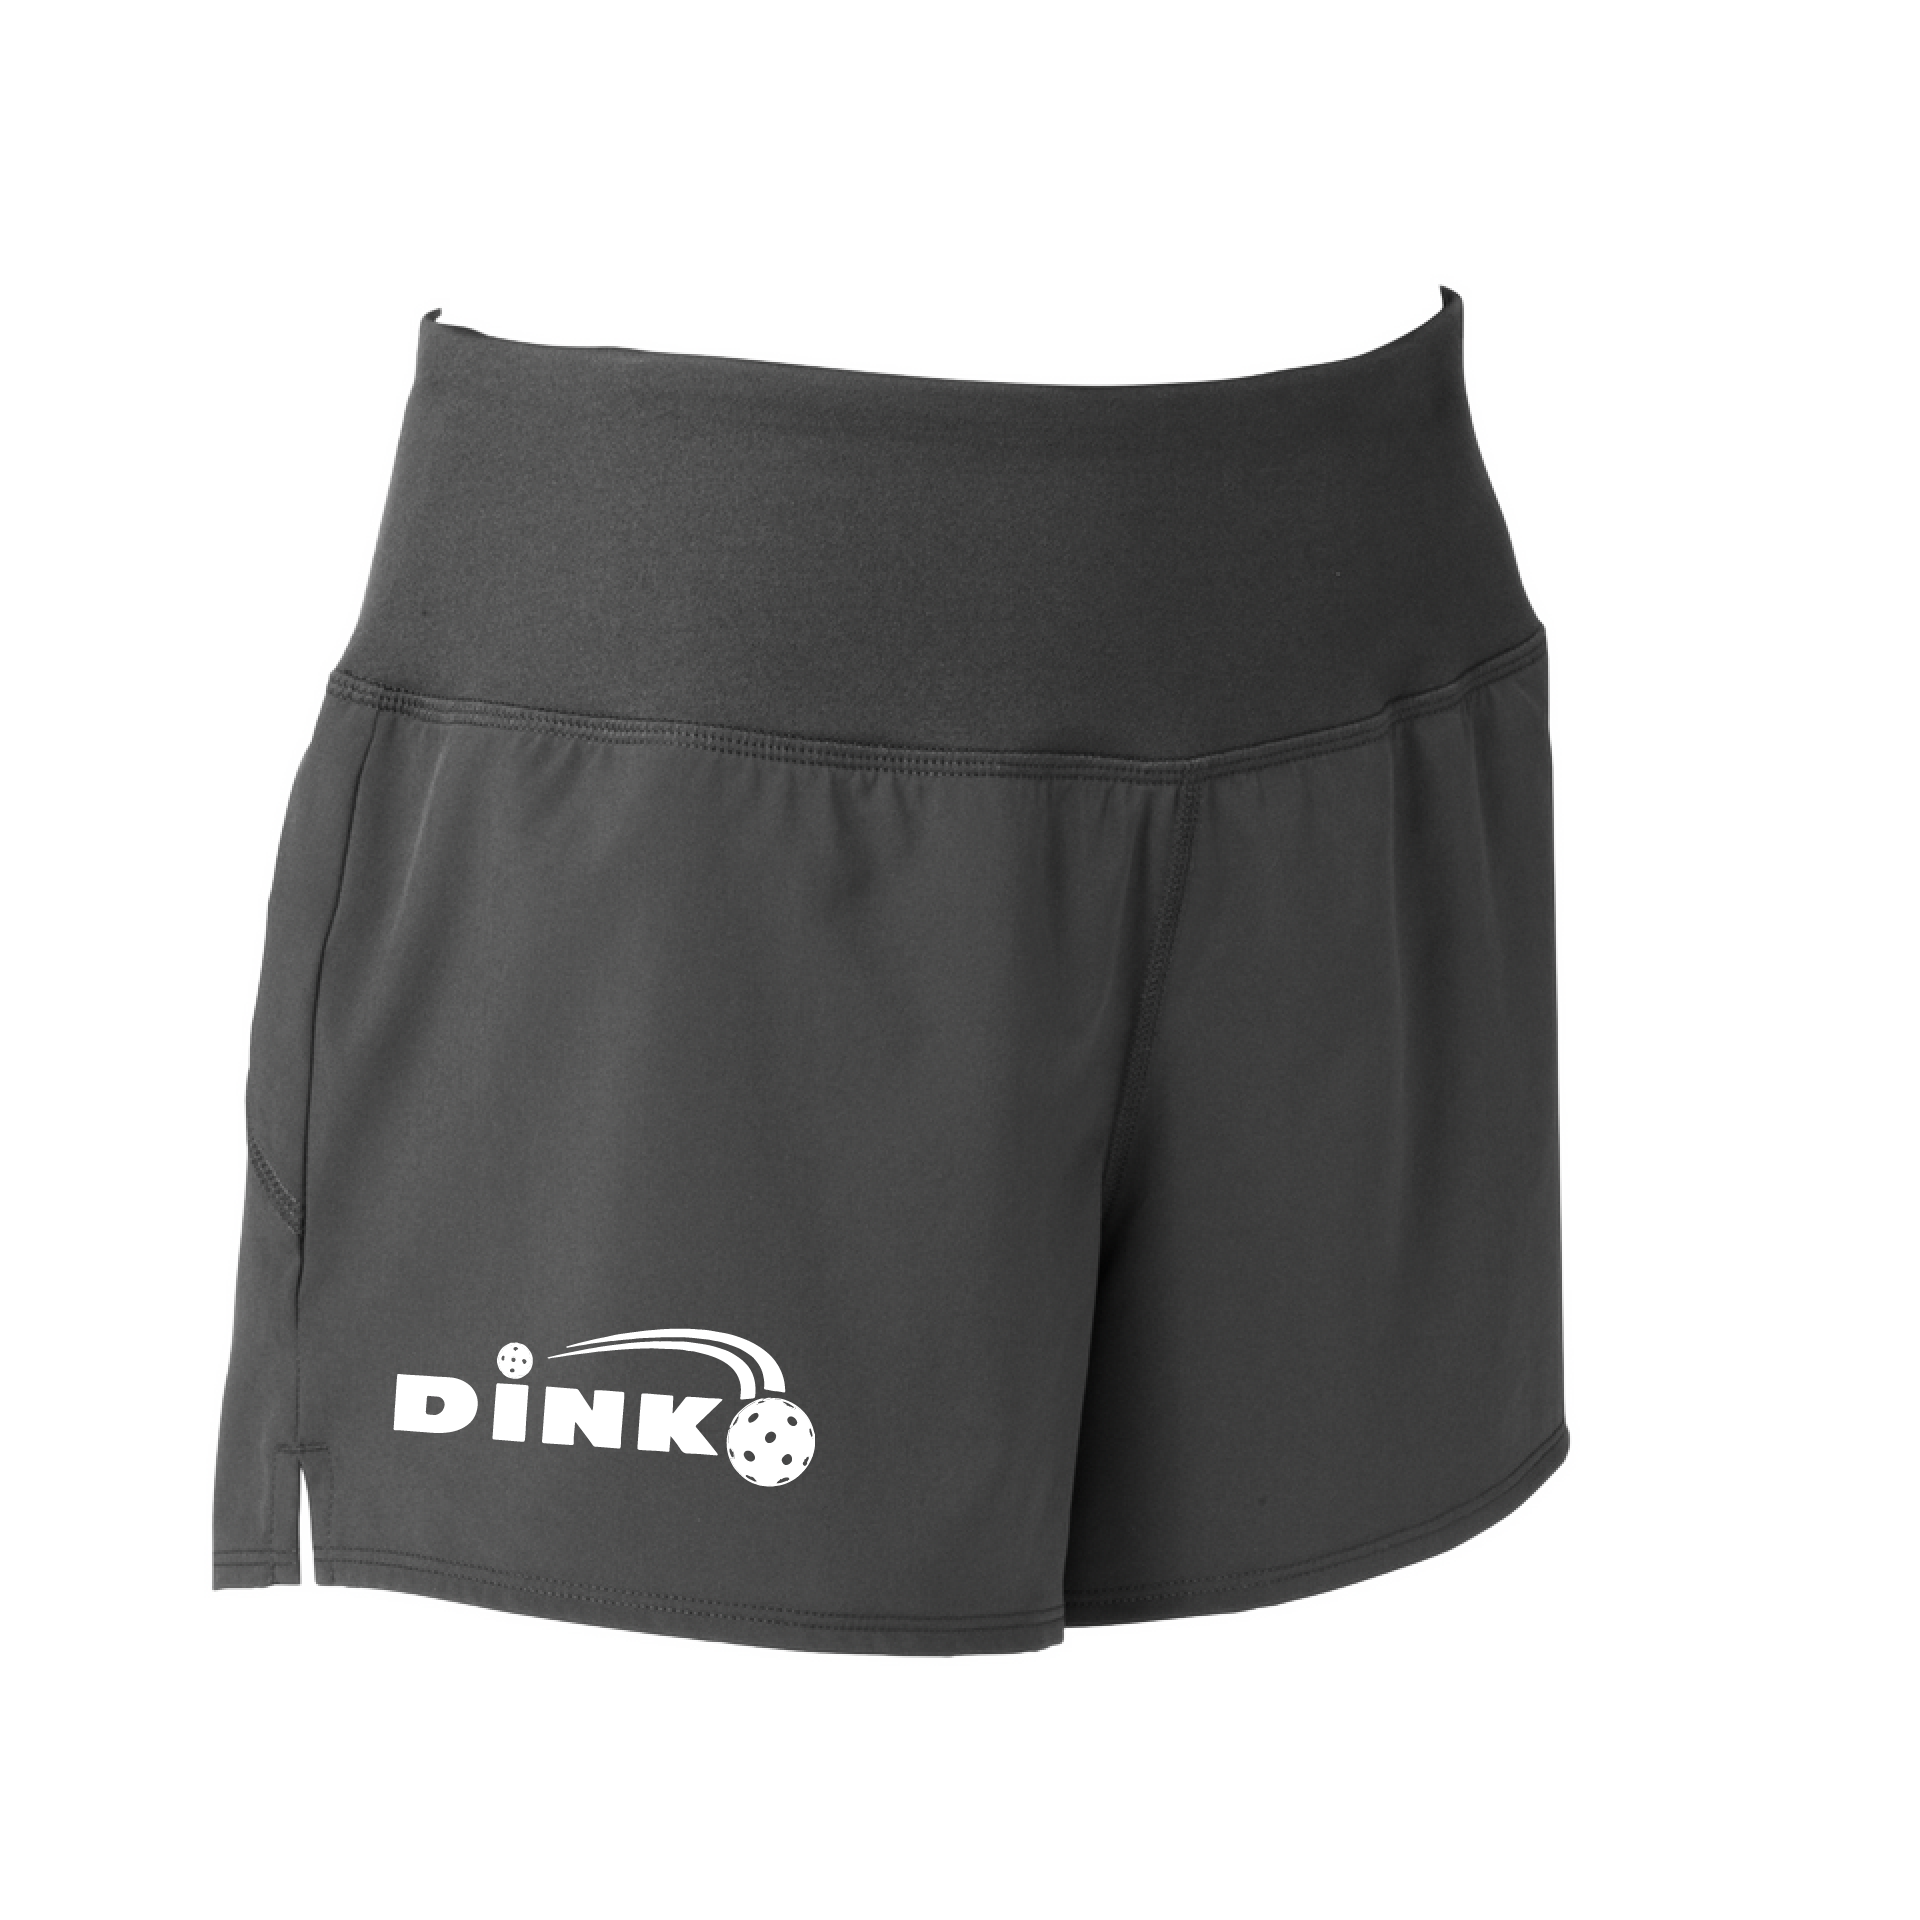 Shorts Pickleball Designs: Dink  Sport Tek women’s repeat shorts come with built-in cell phone pocket on the exterior of the waistband. You can also feel secure knowing that no matter how strenuous the exercise, the shorts will remain in place (it won’t ride up!). These shorts are extremely versatile and trendy. Transition from the Pickleball court to running errands smoothly.